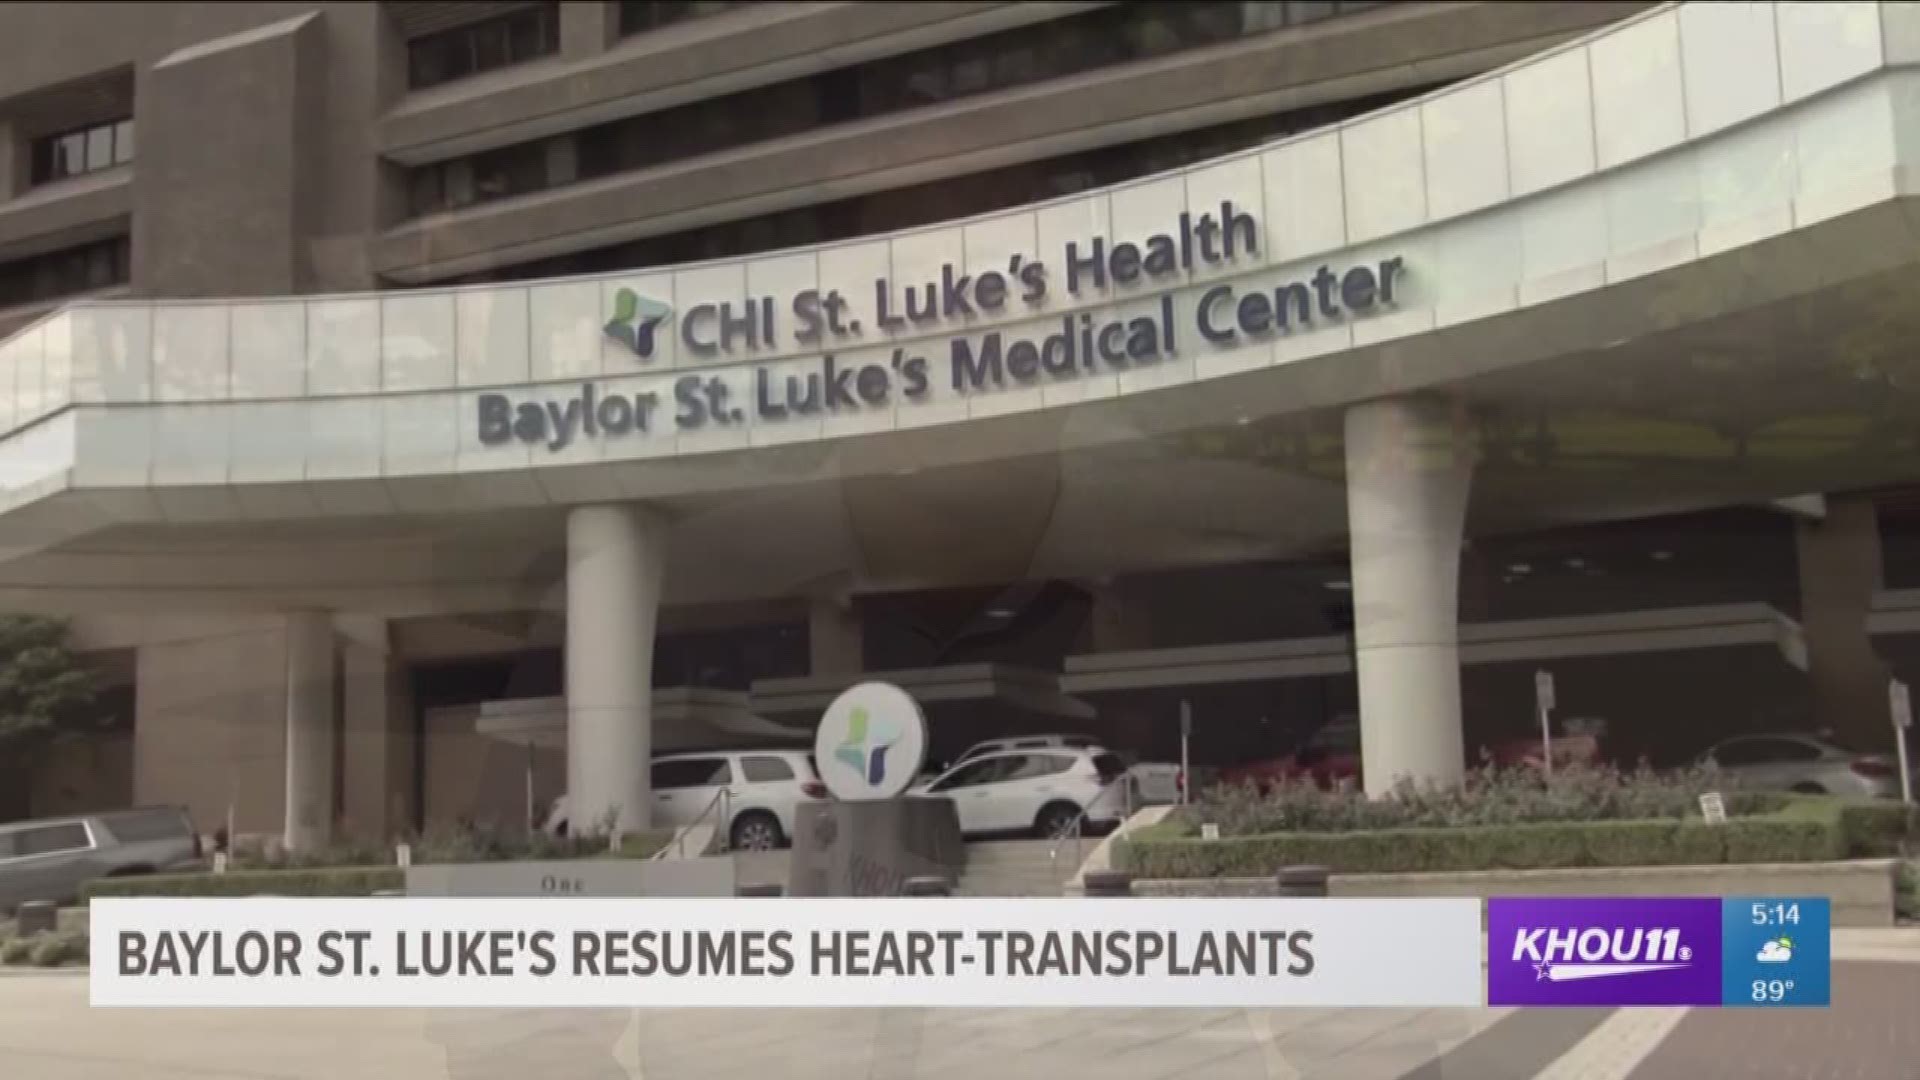 Baylor St. Luke's Medical Center reactivated its heart transplant surgery program after placing it on a 14-day inactive status, a spokesman announced Friday.